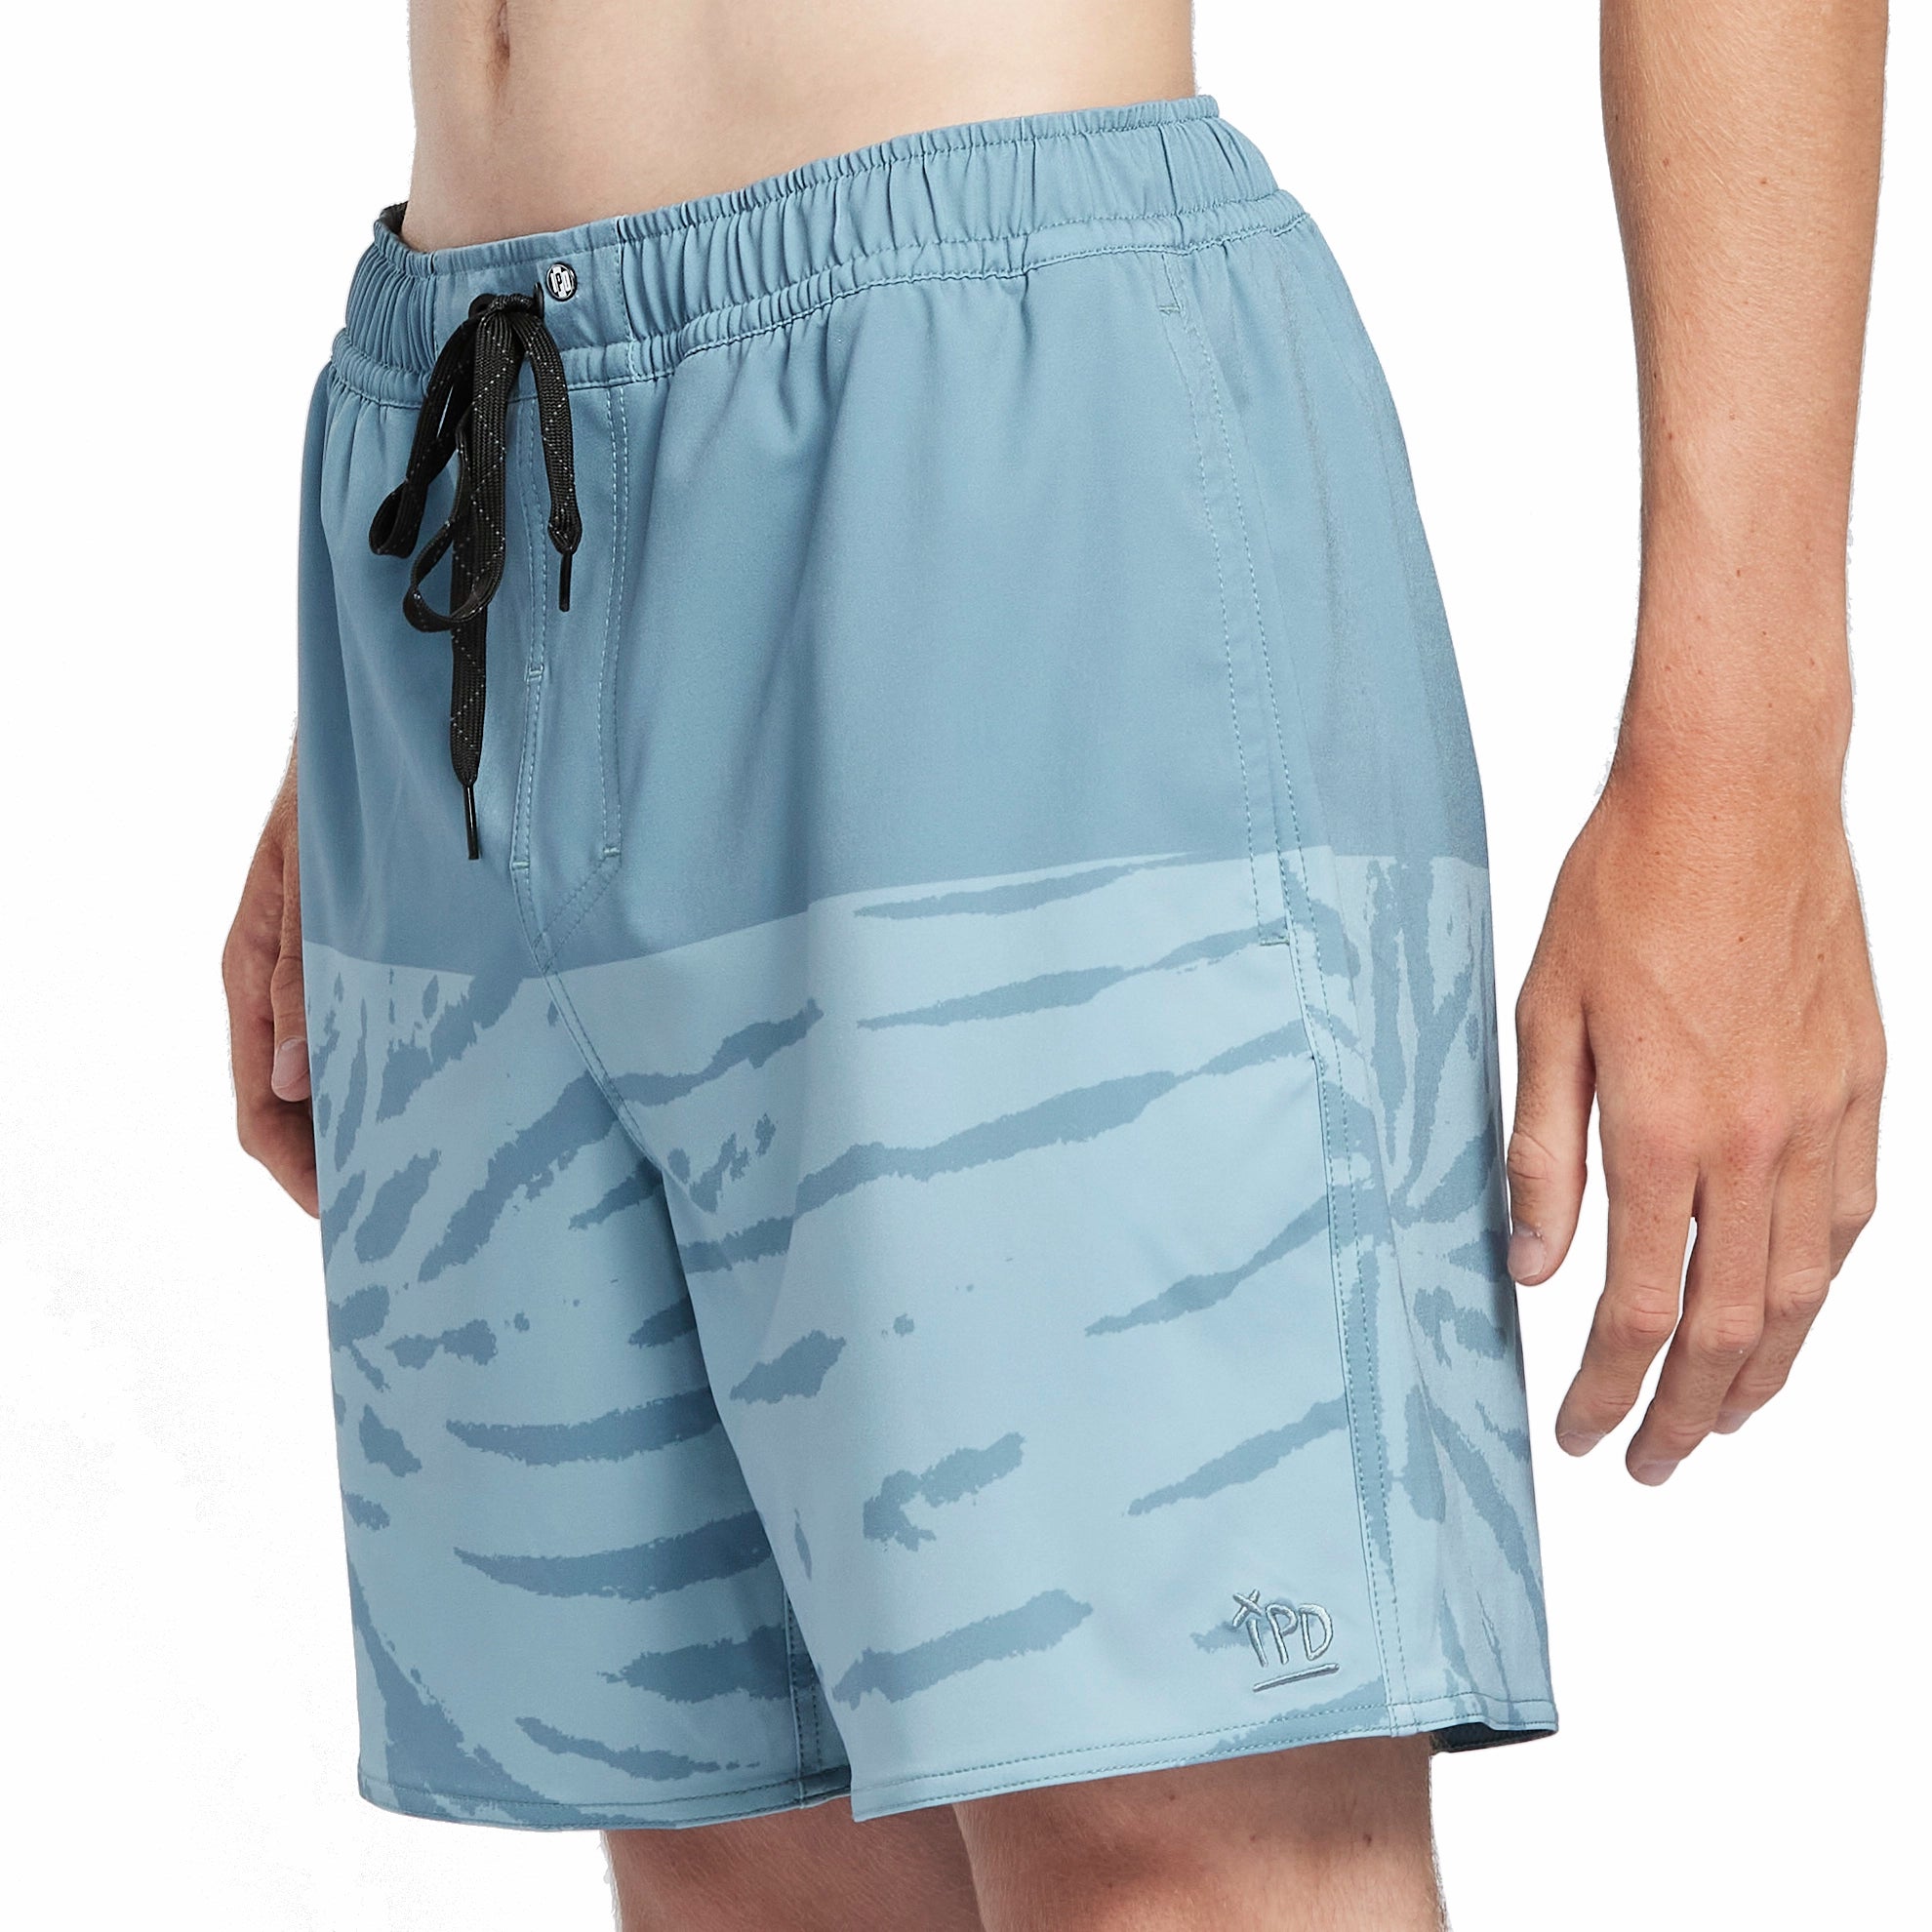 Black boardshorts with a gray swirl pattern front view.